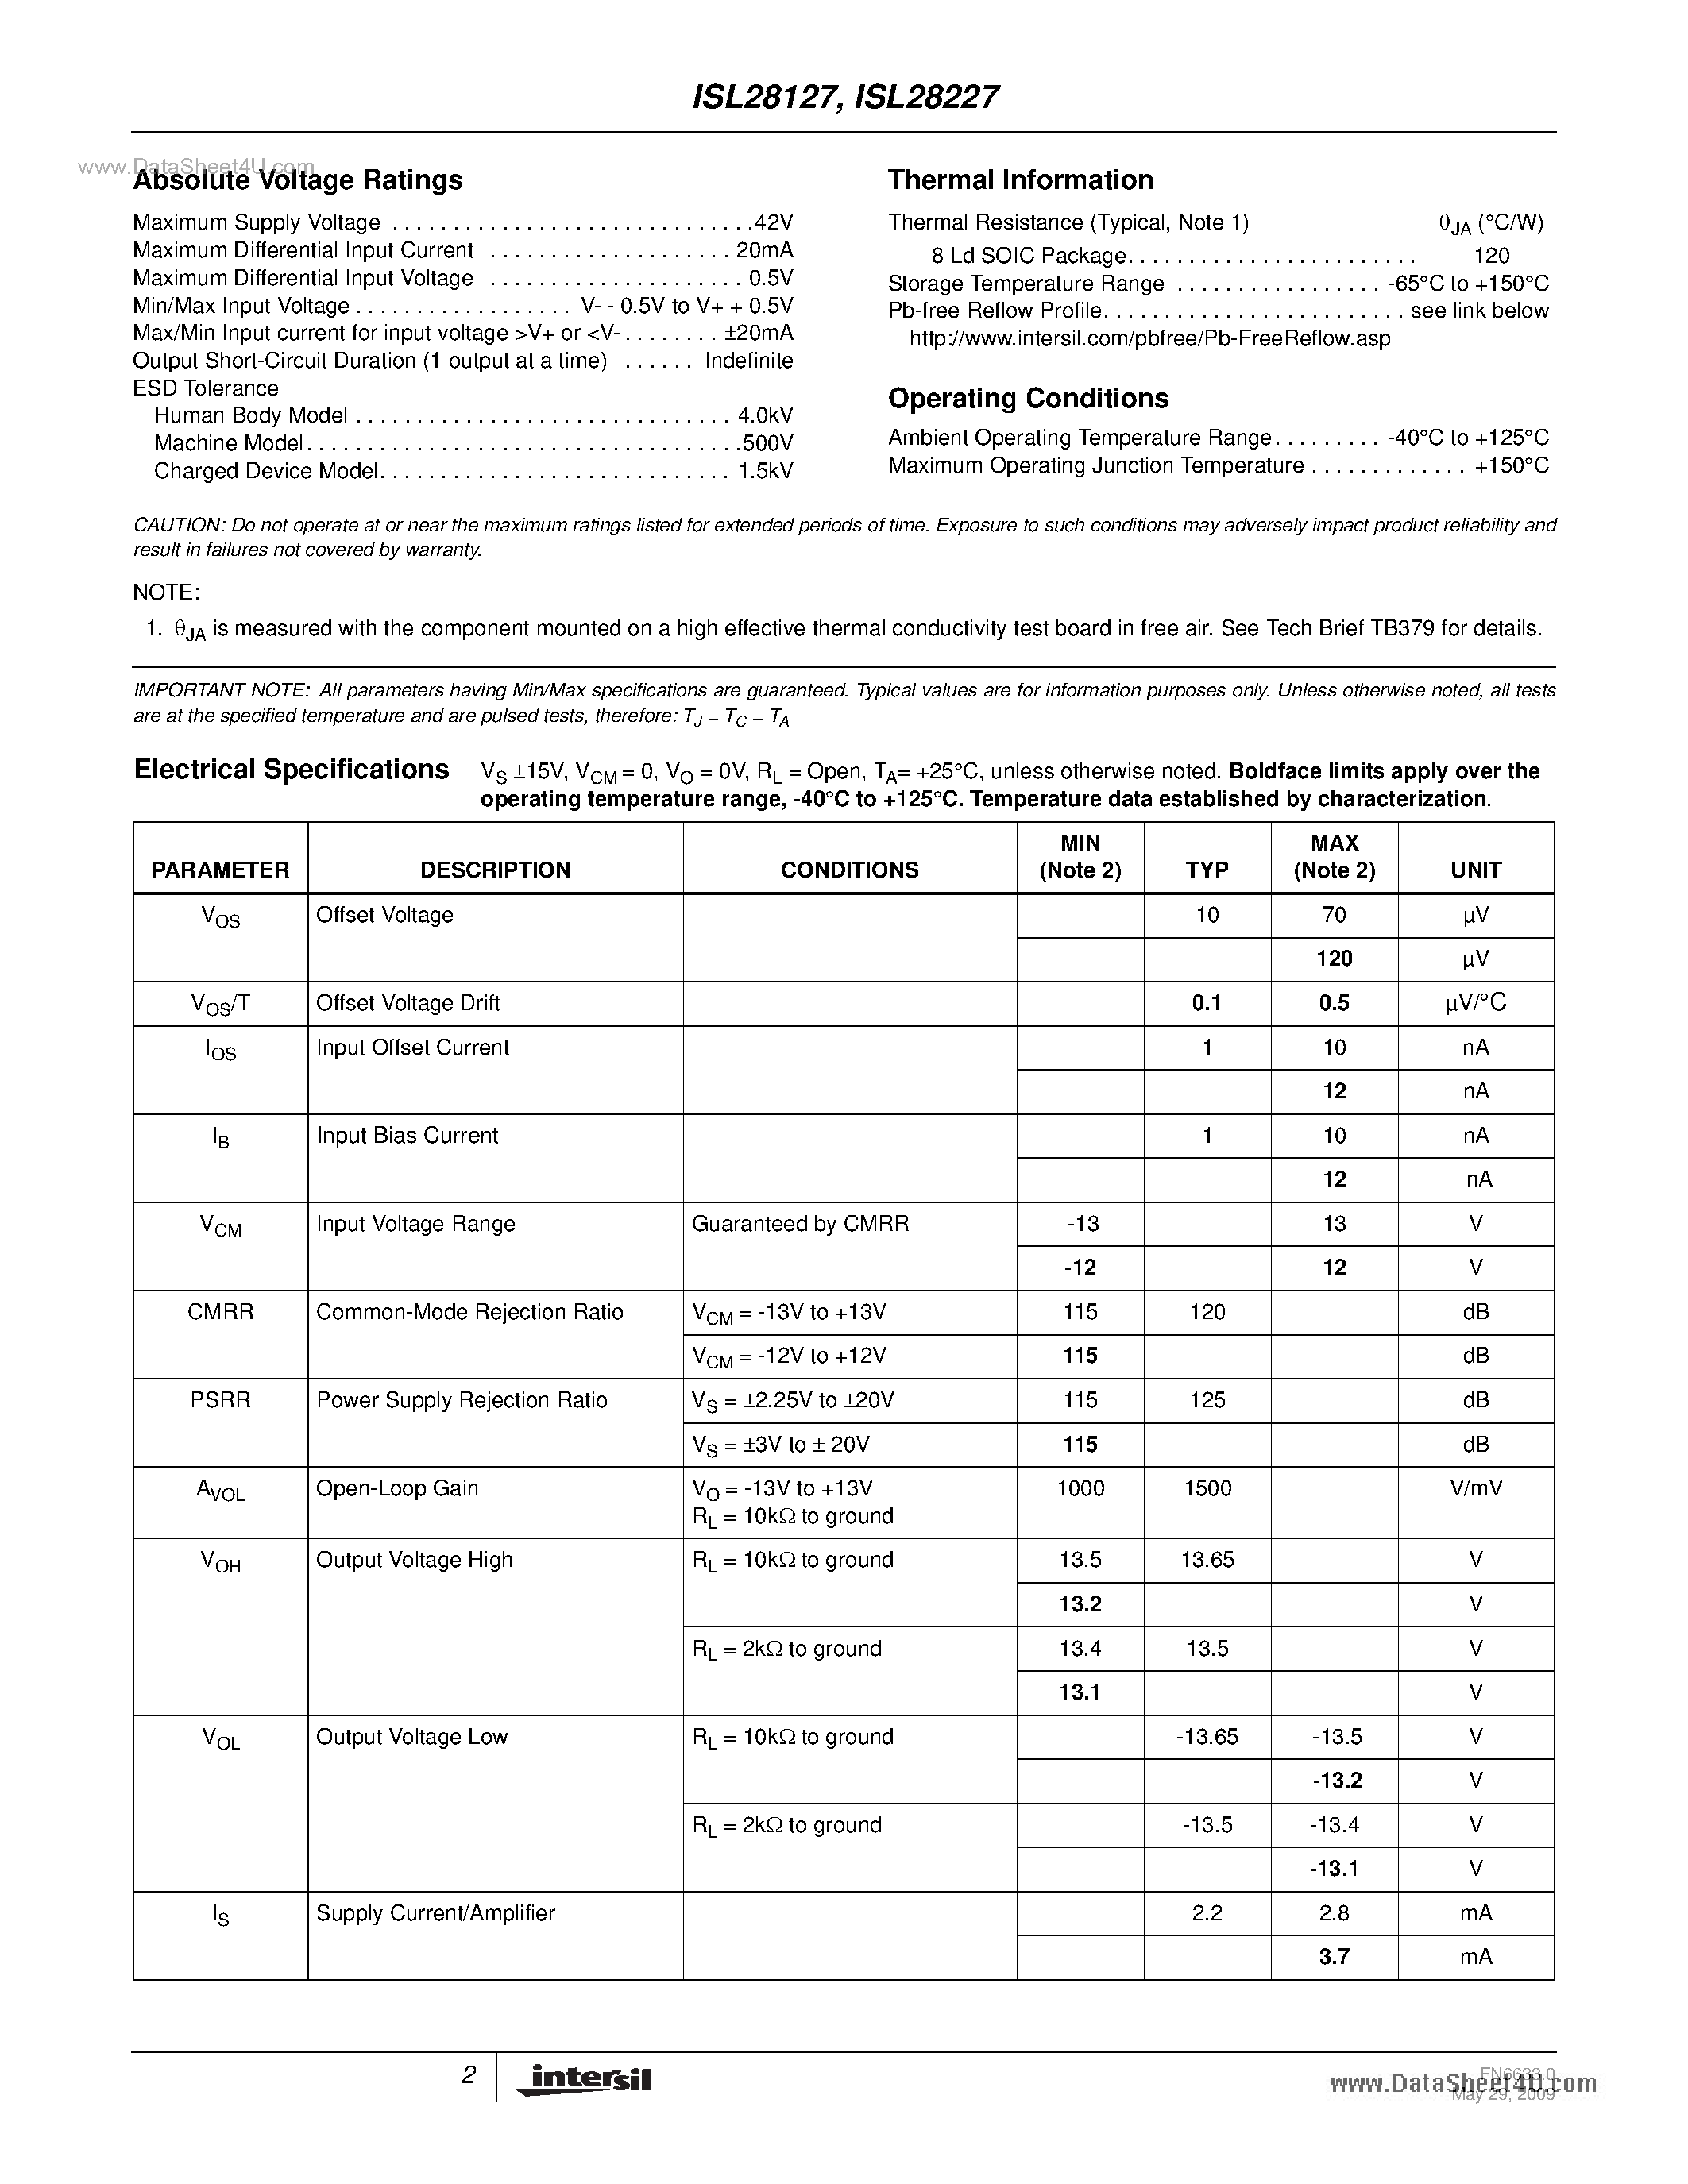 Datasheet ISL28227 - (ISL28127 / ISL28227) Precision Single And Dual Low Noise Operational Amplifiers page 2